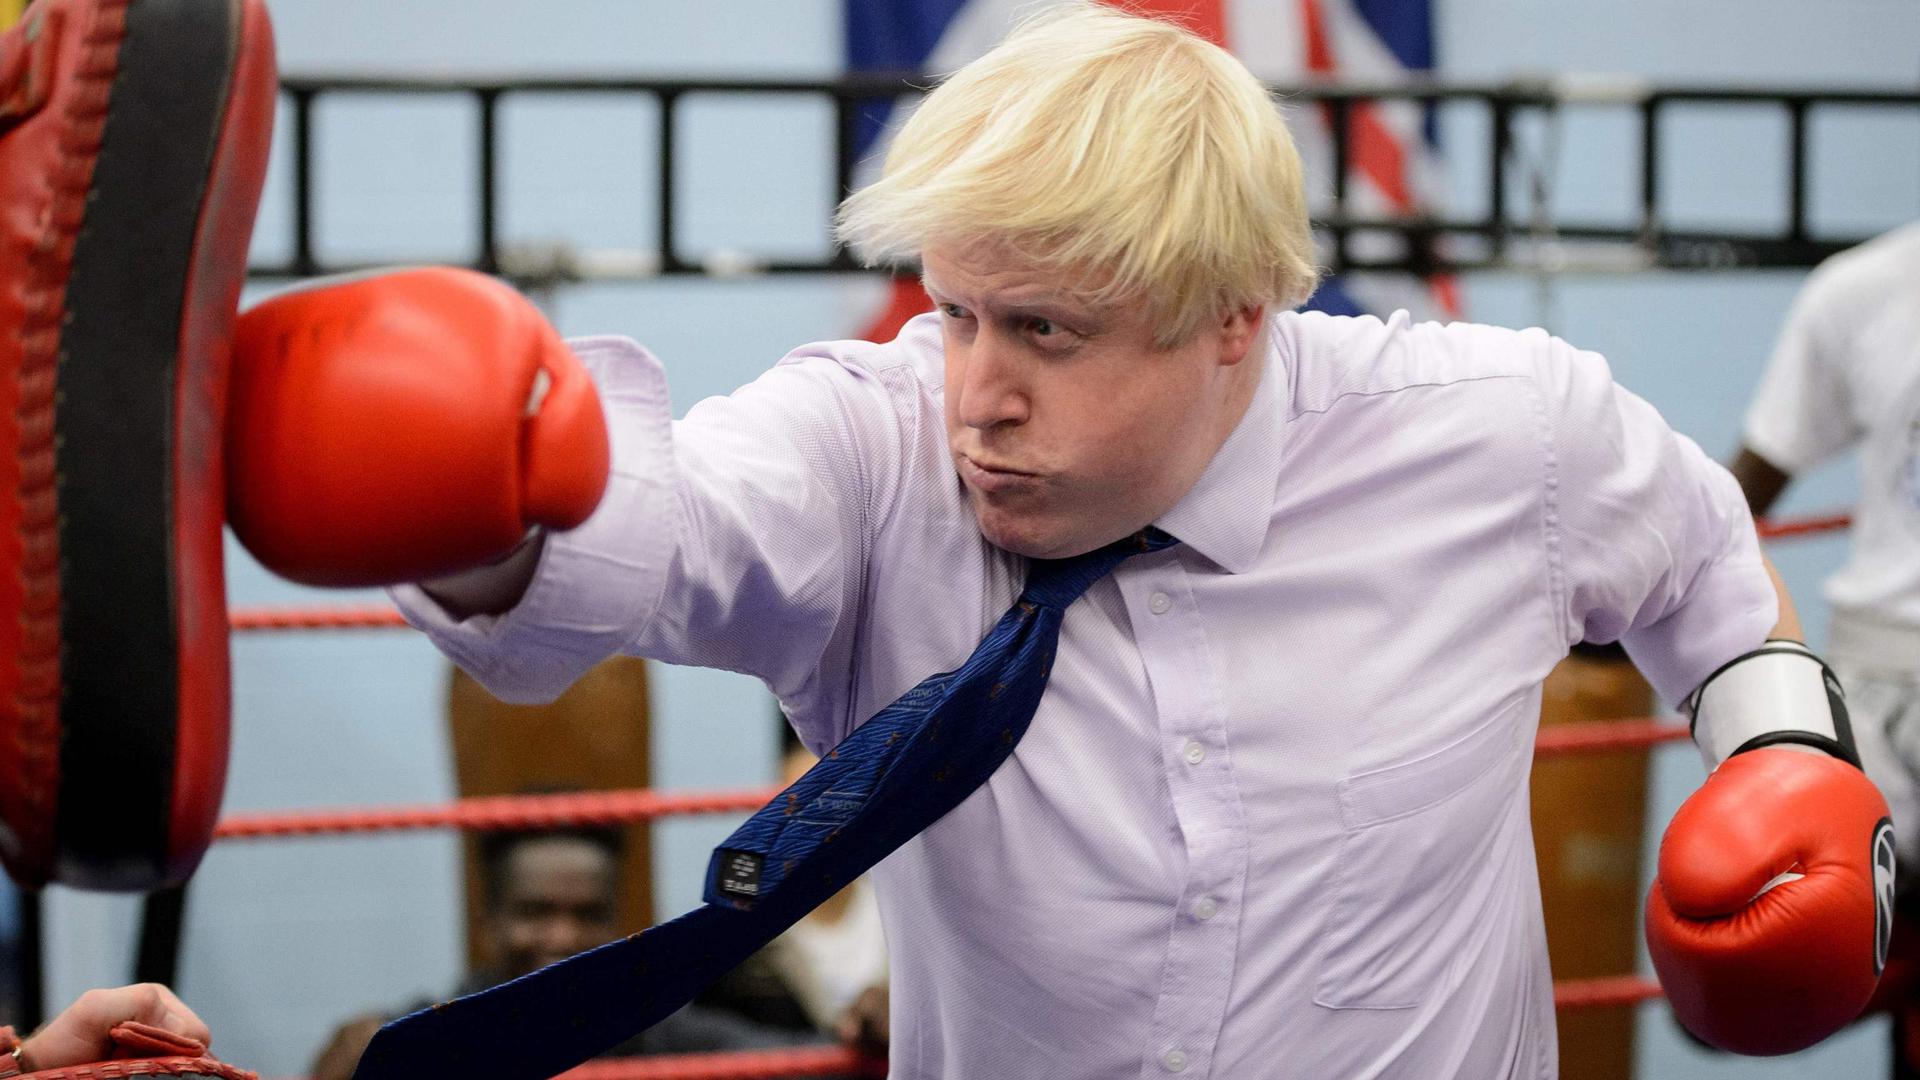 (FILES) In this file photo taken on October 28, 2014 Mayor of London Boris Johnson boxes with a trainer during his visit to Fight for Peace Academy in North Woolwich, London. - Former London mayor Boris Johnson on July 23, 2019 won the race to become Britain's next prime minister, defeating Foreign Secretary Jeremy Hunt in the Conservative Party leadership contest. (Photo by LEON NEAL / AFP)